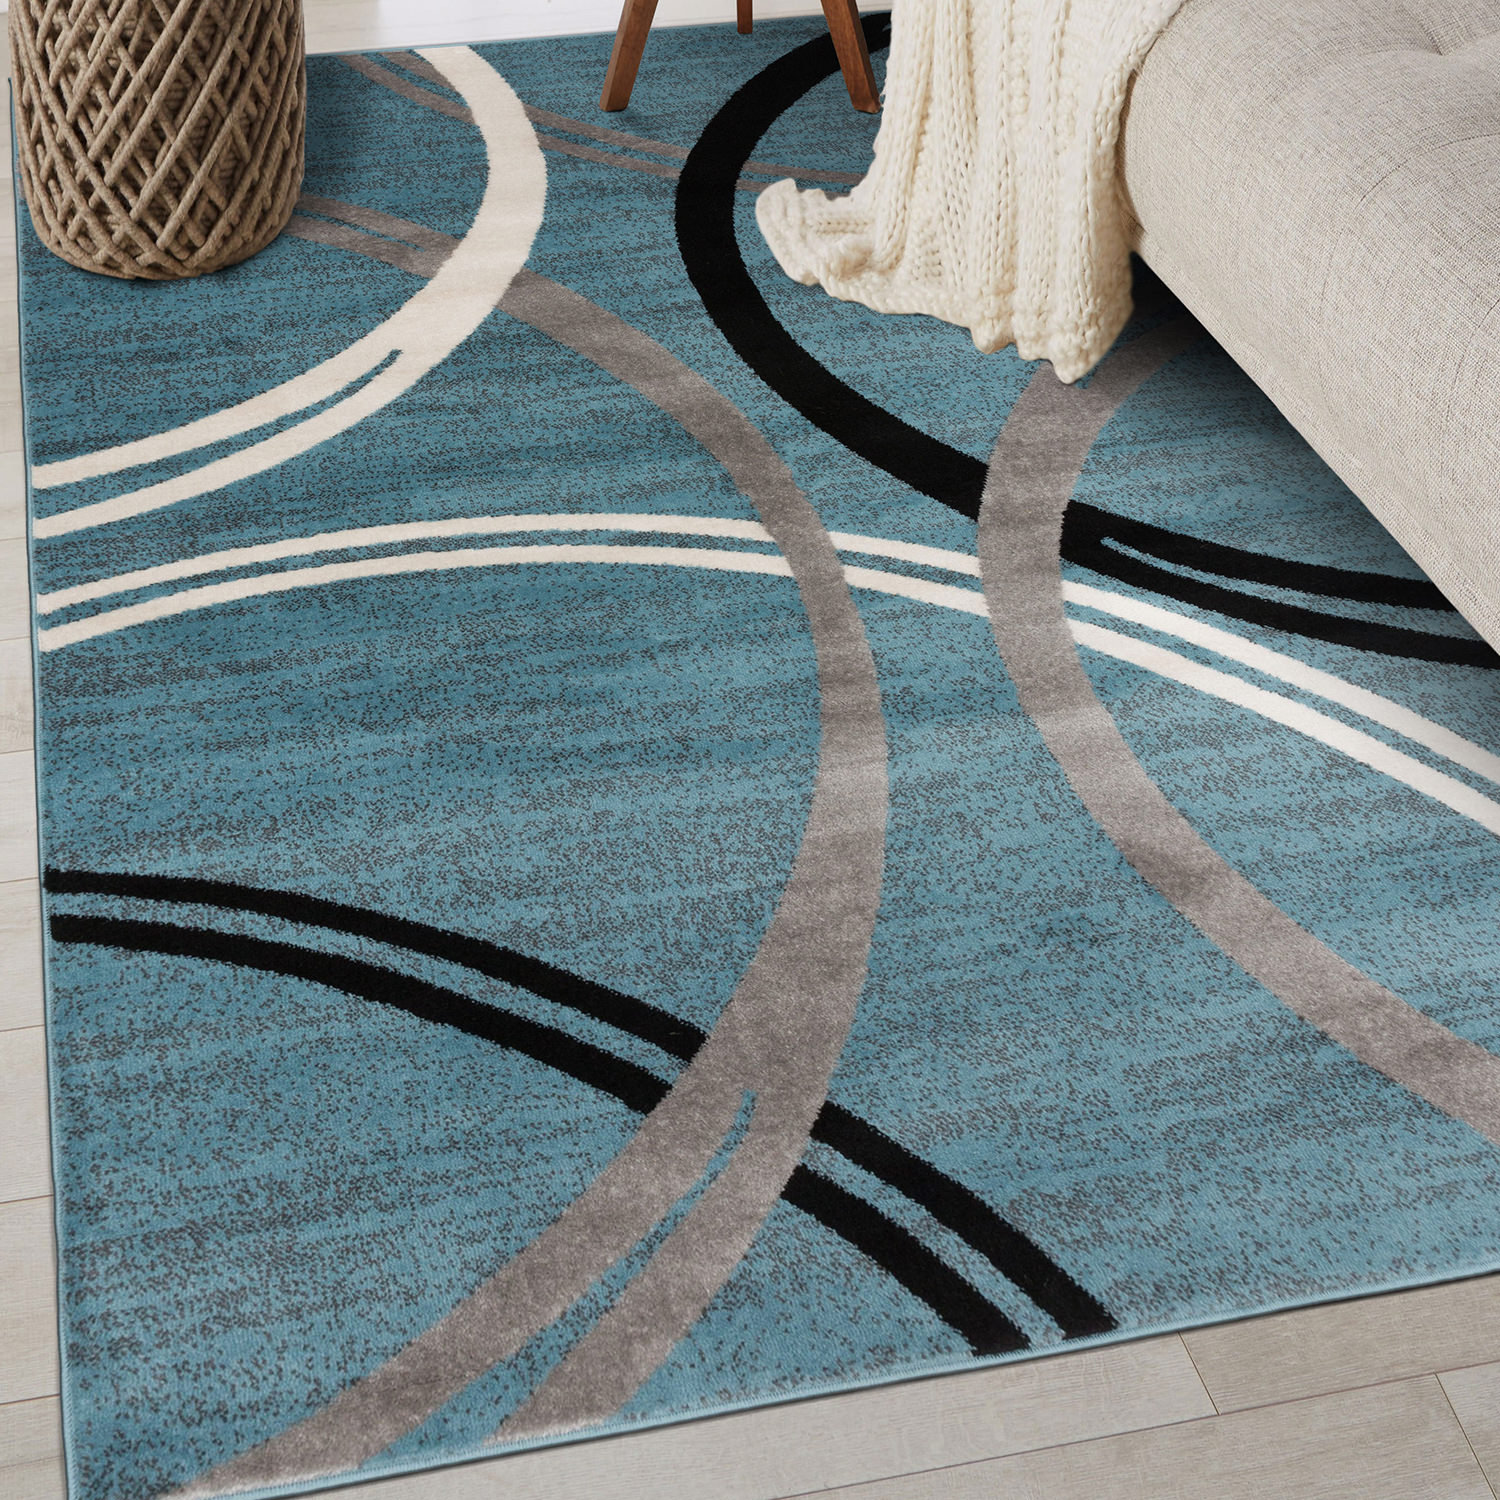 Better Homes & Gardens Persian Non-Skid Accent Rug - Blue - 30X46 in